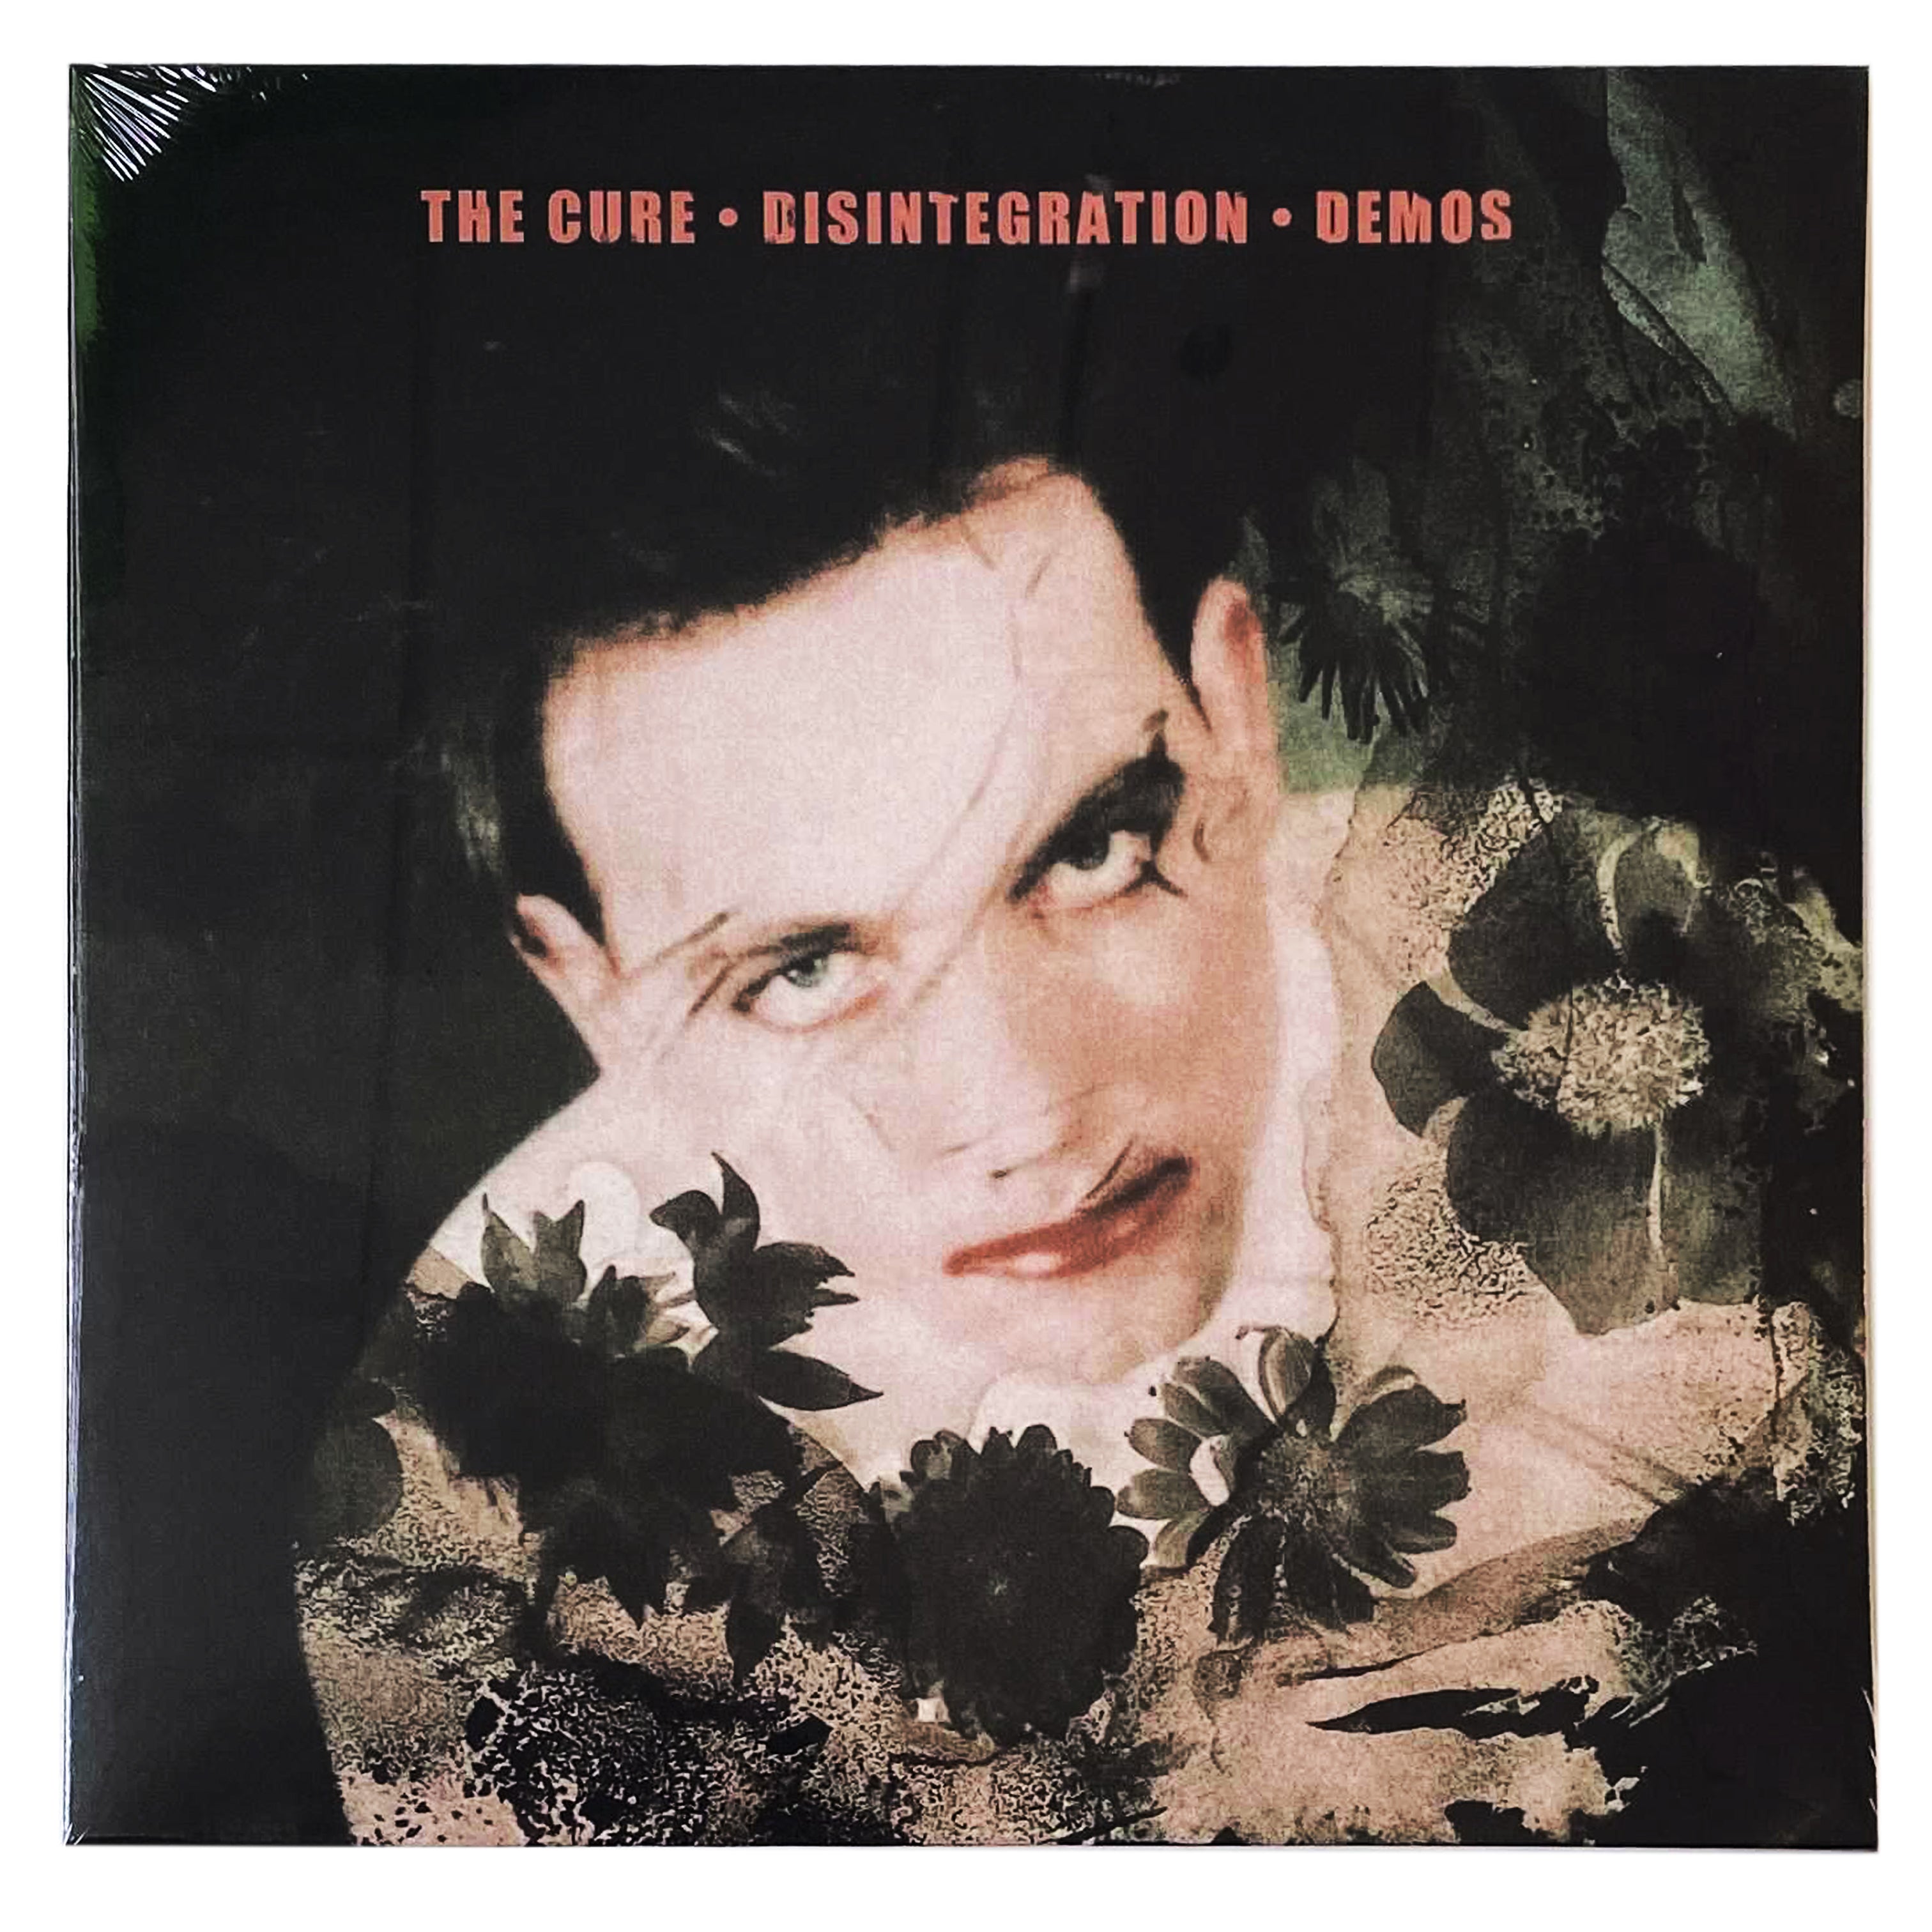 The Cure: Disintegration - Demos 12 – Sorry State Records